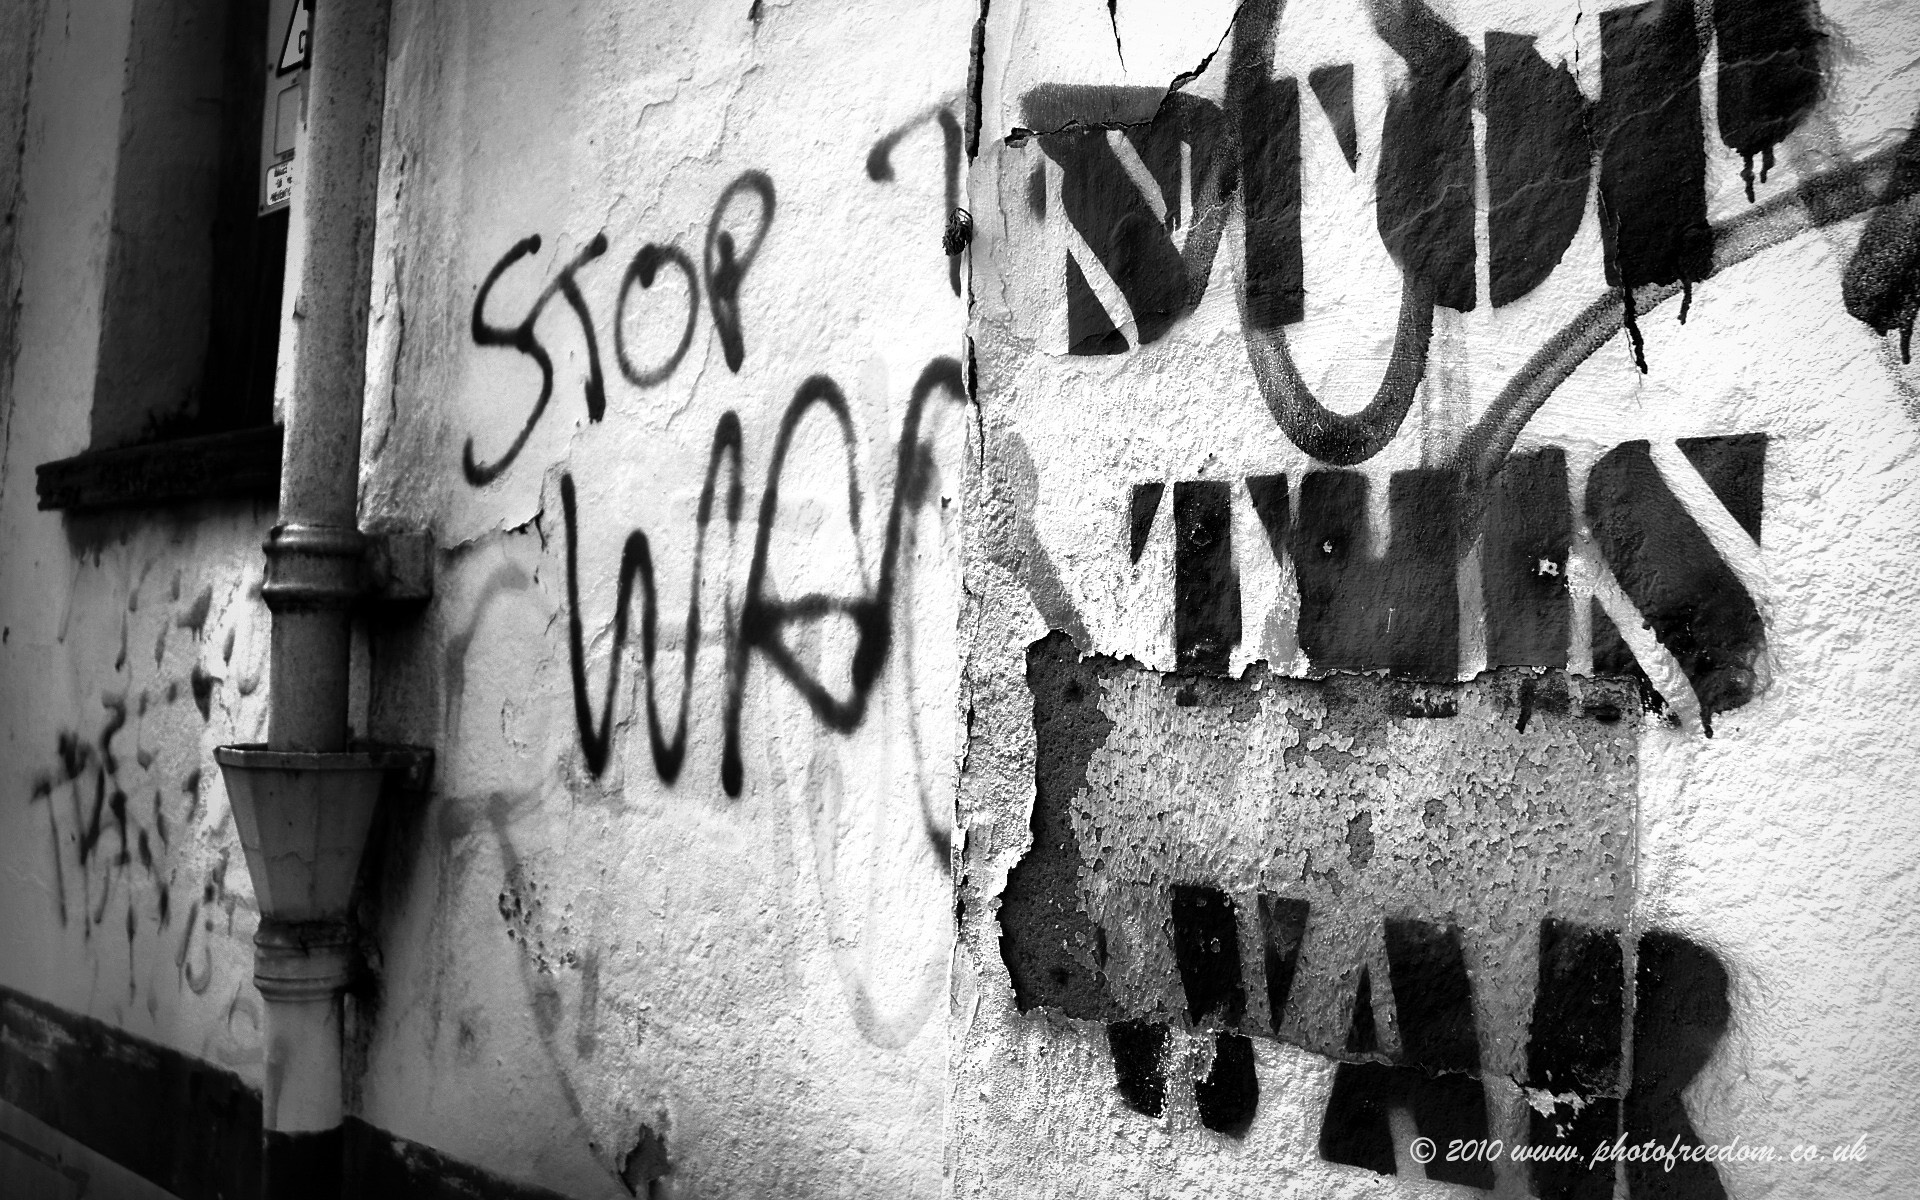 Free Download HQ say no to war, no to war, stop war, black and white Creative Photo Wallpaper Num. 14, 1920 x 1200 814.1 Kb